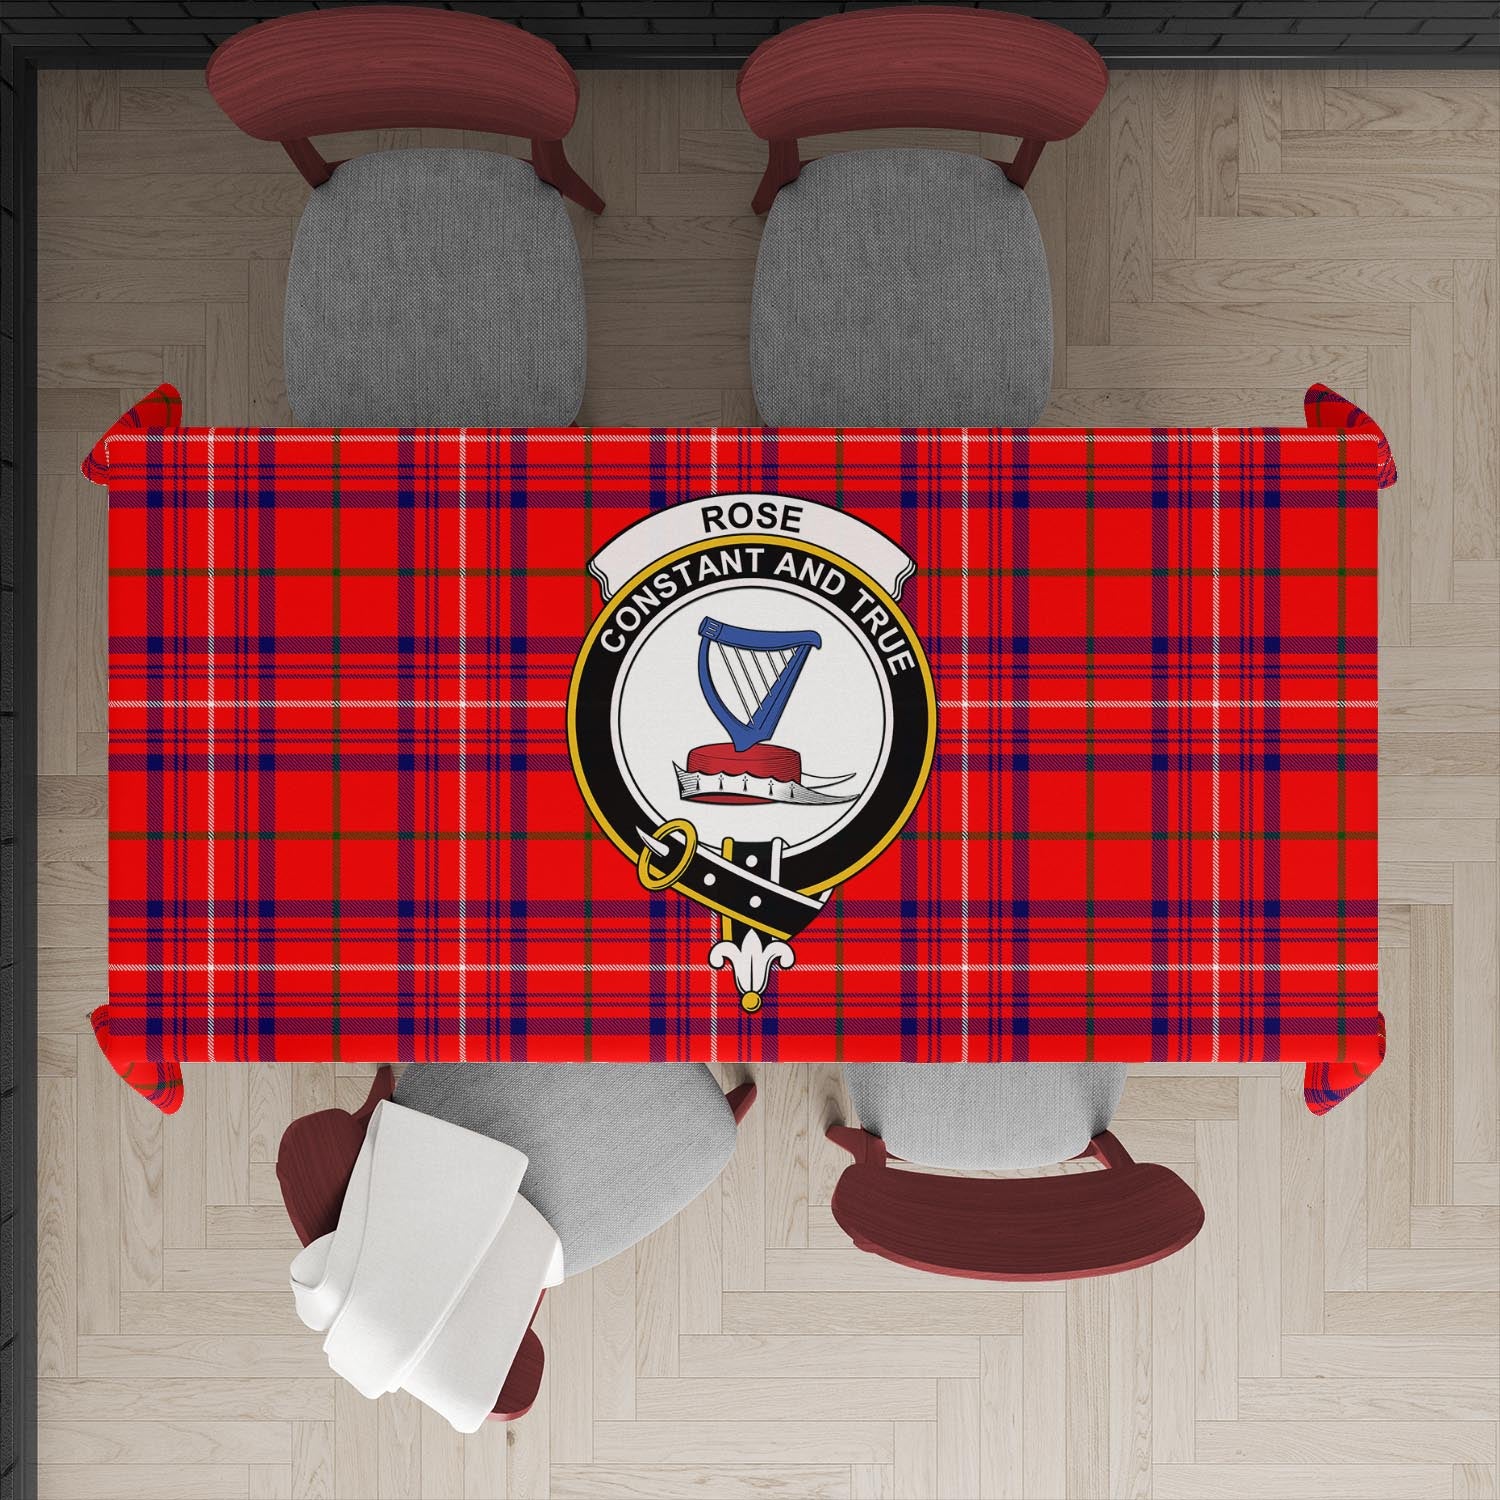 rose-modern-tatan-tablecloth-with-family-crest